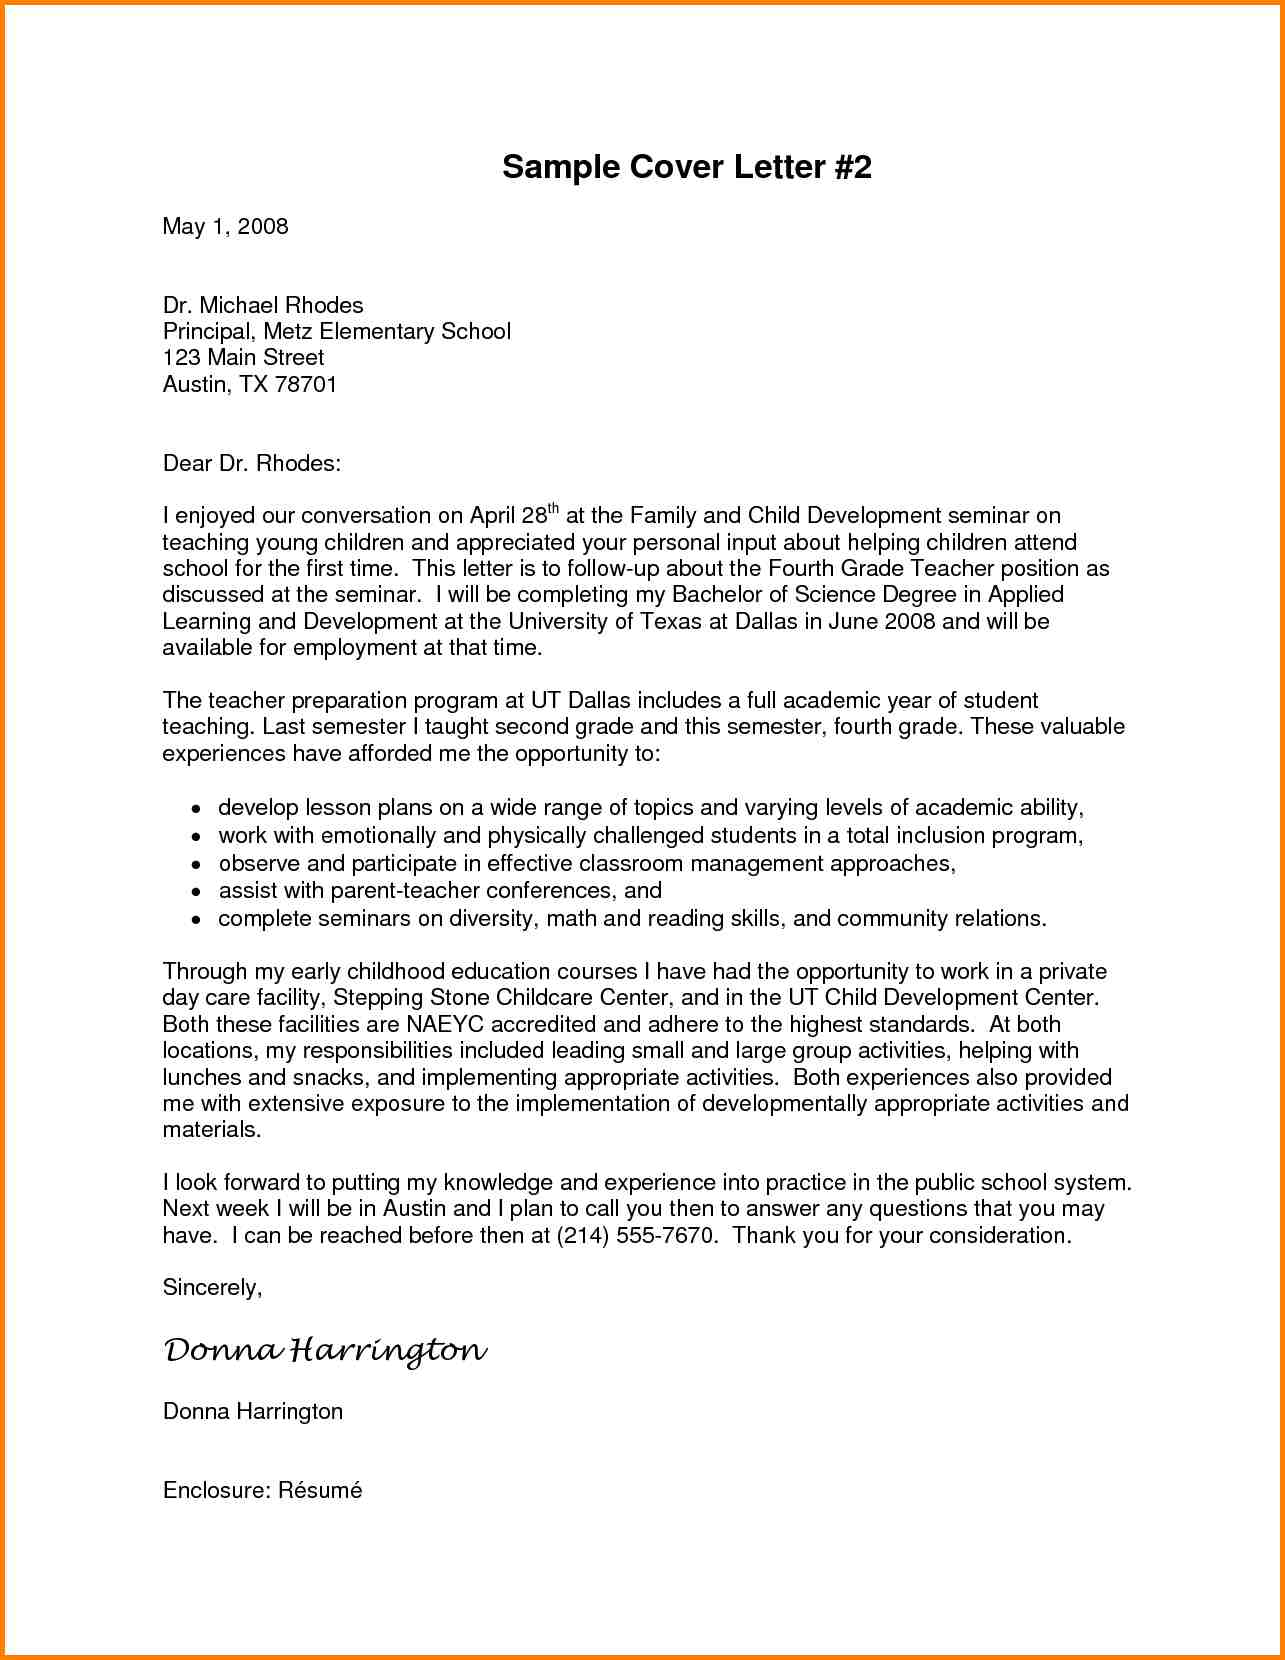 Sample Letter To Principal Mobile Discoveries